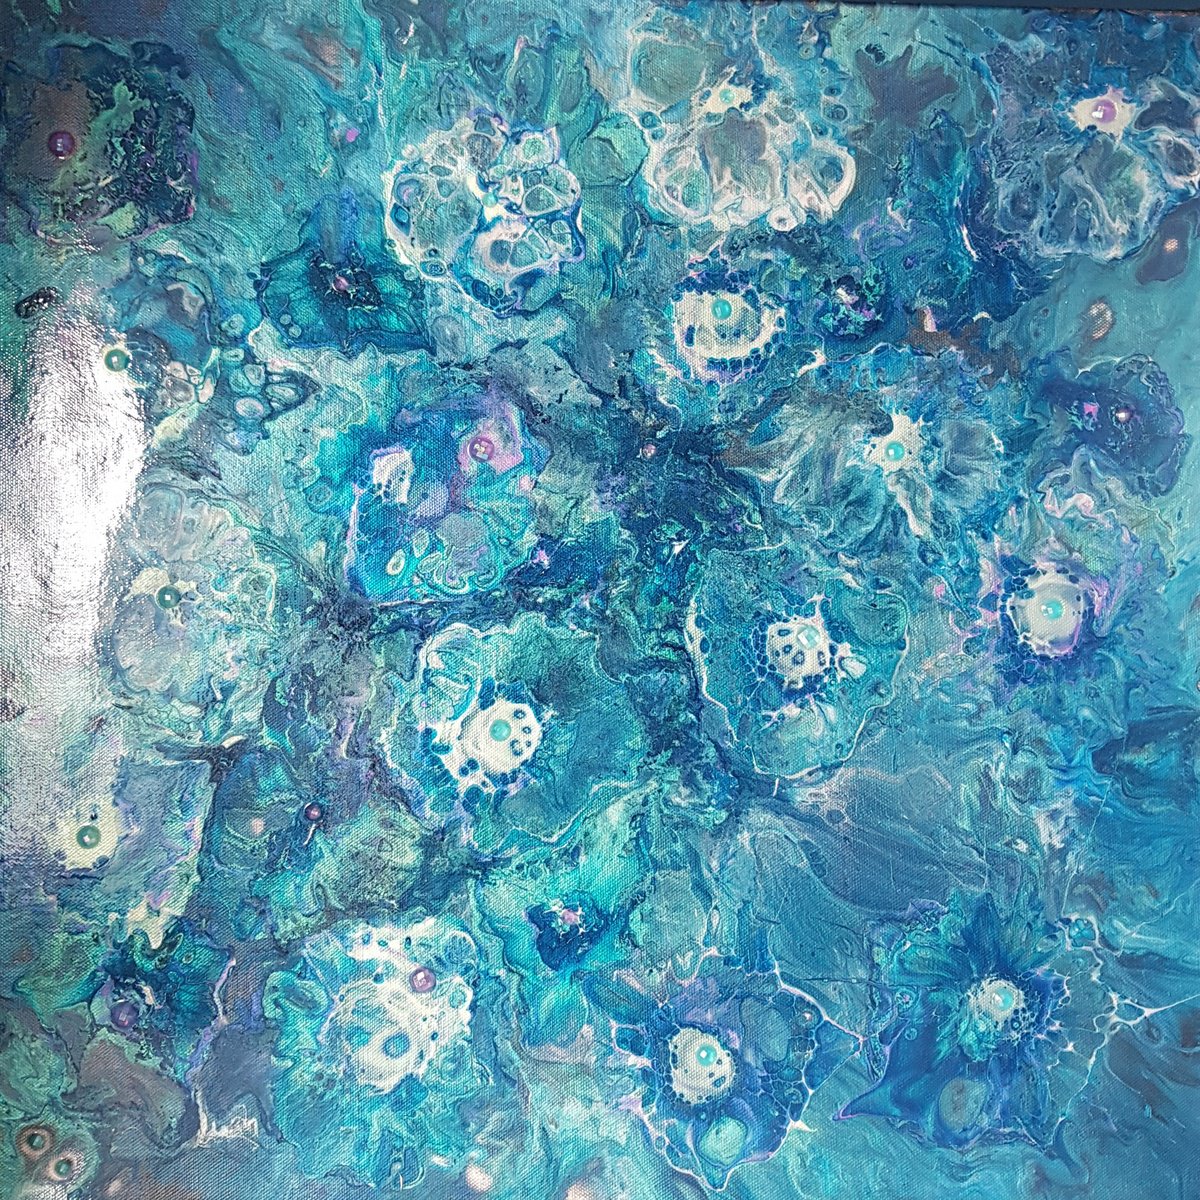 Many turquoise flowers by Fiona J Robinson